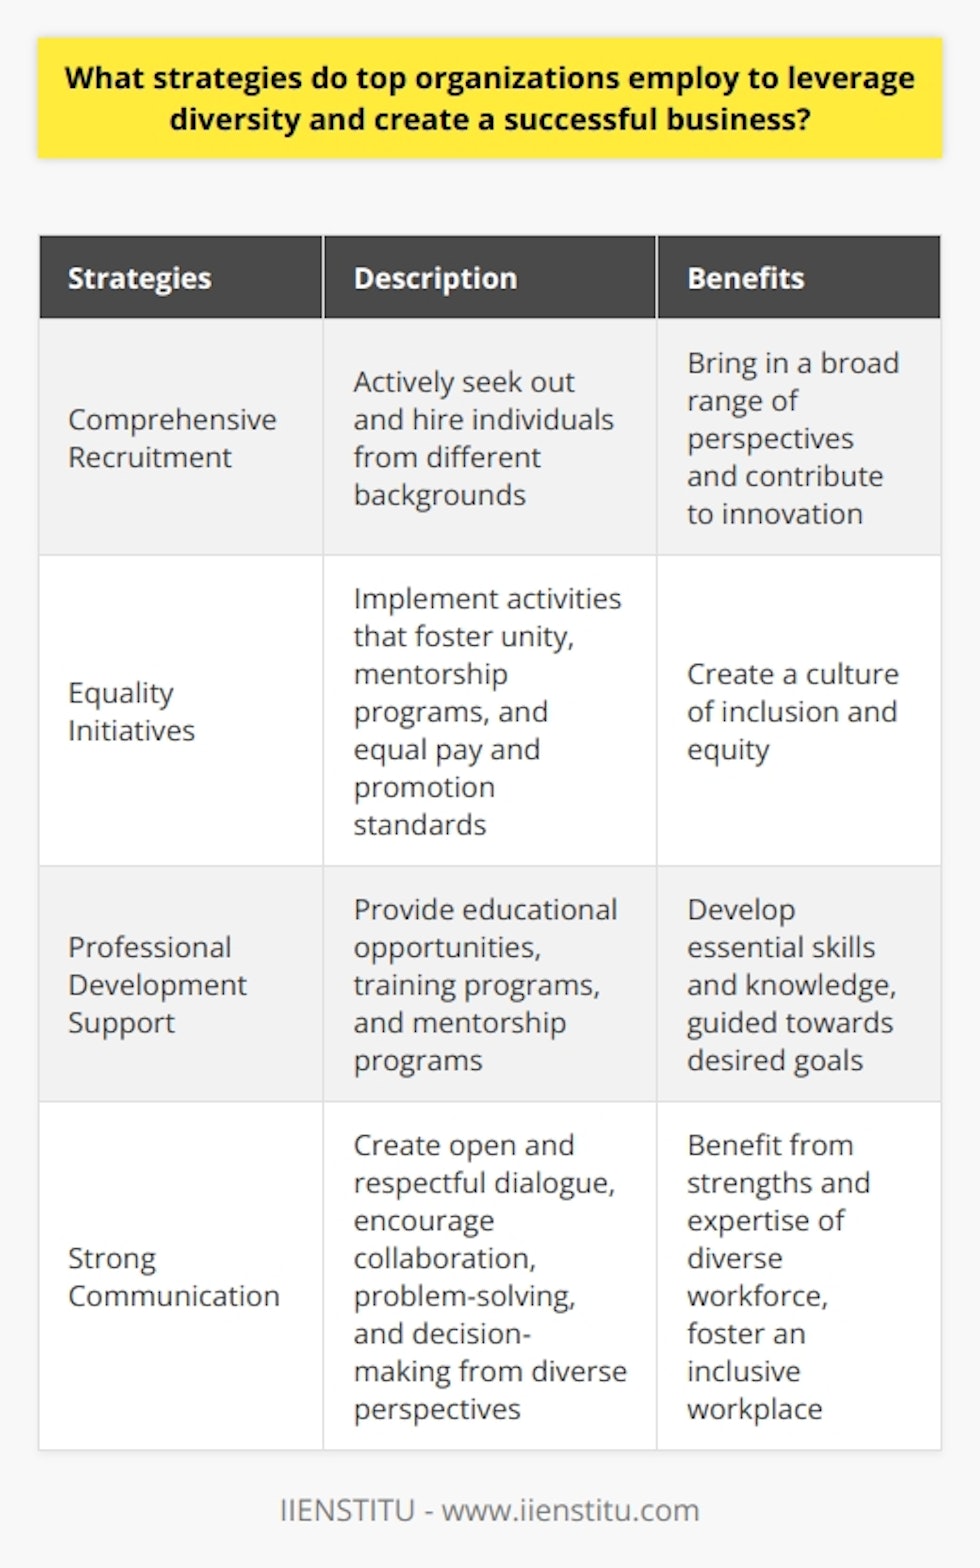 Top organizations employ various strategies to leverage diversity and create a successful business. These strategies include developing comprehensive recruitment strategies to attract a diverse talent pool, implementing initiatives to promote equality within the workplace, supporting the professional development of diverse individuals, and emphasizing strong communication between all stakeholders.One key strategy is the development of a recruitment strategy that actively seeks out and hires individuals from different backgrounds. By doing so, organizations can bring in a broad range of perspectives, ideas, and attitudes that can contribute to innovation and problem-solving. This helps to create a workforce that is more responsive to the needs and wants of the organization's diverse customer base.In addition, organizations leverage diversity by implementing initiatives that promote equality within the workplace. This can include recognizing and celebrating workforce diversity through events and activities that foster unity, creating mentorship programs to support marginalized groups, and implementing equal pay and promotion standards for employees in the same roles. By establishing clear guidelines for respectful behavior and eliminating discriminatory practices, organizations can create a culture of inclusion and equity.Supporting the professional development of diverse individuals is another critical strategy. This can be achieved through providing educational opportunities and training programs that focus on developing essential skills and knowledge. Offering mentorship programs that help guide employees towards their desired goals is also important. Additionally, hosting seminars and dialogues about diversity-related topics can help to foster an environment where diverse individuals can make valuable contributions to the organization.Finally, strong communication is essential in leveraging diversity within an organization. This includes creating hierarchical structures that facilitate open and respectful dialogue between all employees, particularly those from different backgrounds. By encouraging collaboration, problem-solving, and decision-making from diverse perspectives, organizations can benefit from the strengths and expertise of their diverse workforce. Creating an atmosphere of mutual trust and understanding among all individuals is also essential in fostering an inclusive workplace.In conclusion, top organizations employ various strategies to leverage diversity and create a successful business. By developing comprehensive recruitment strategies, promoting equality within the workplace, supporting the professional development of diverse individuals, and emphasizing strong communication, organizations can build a culture of inclusion and equity. This ultimately helps them to attract a diverse talent pool, foster innovation, and create a thriving business.